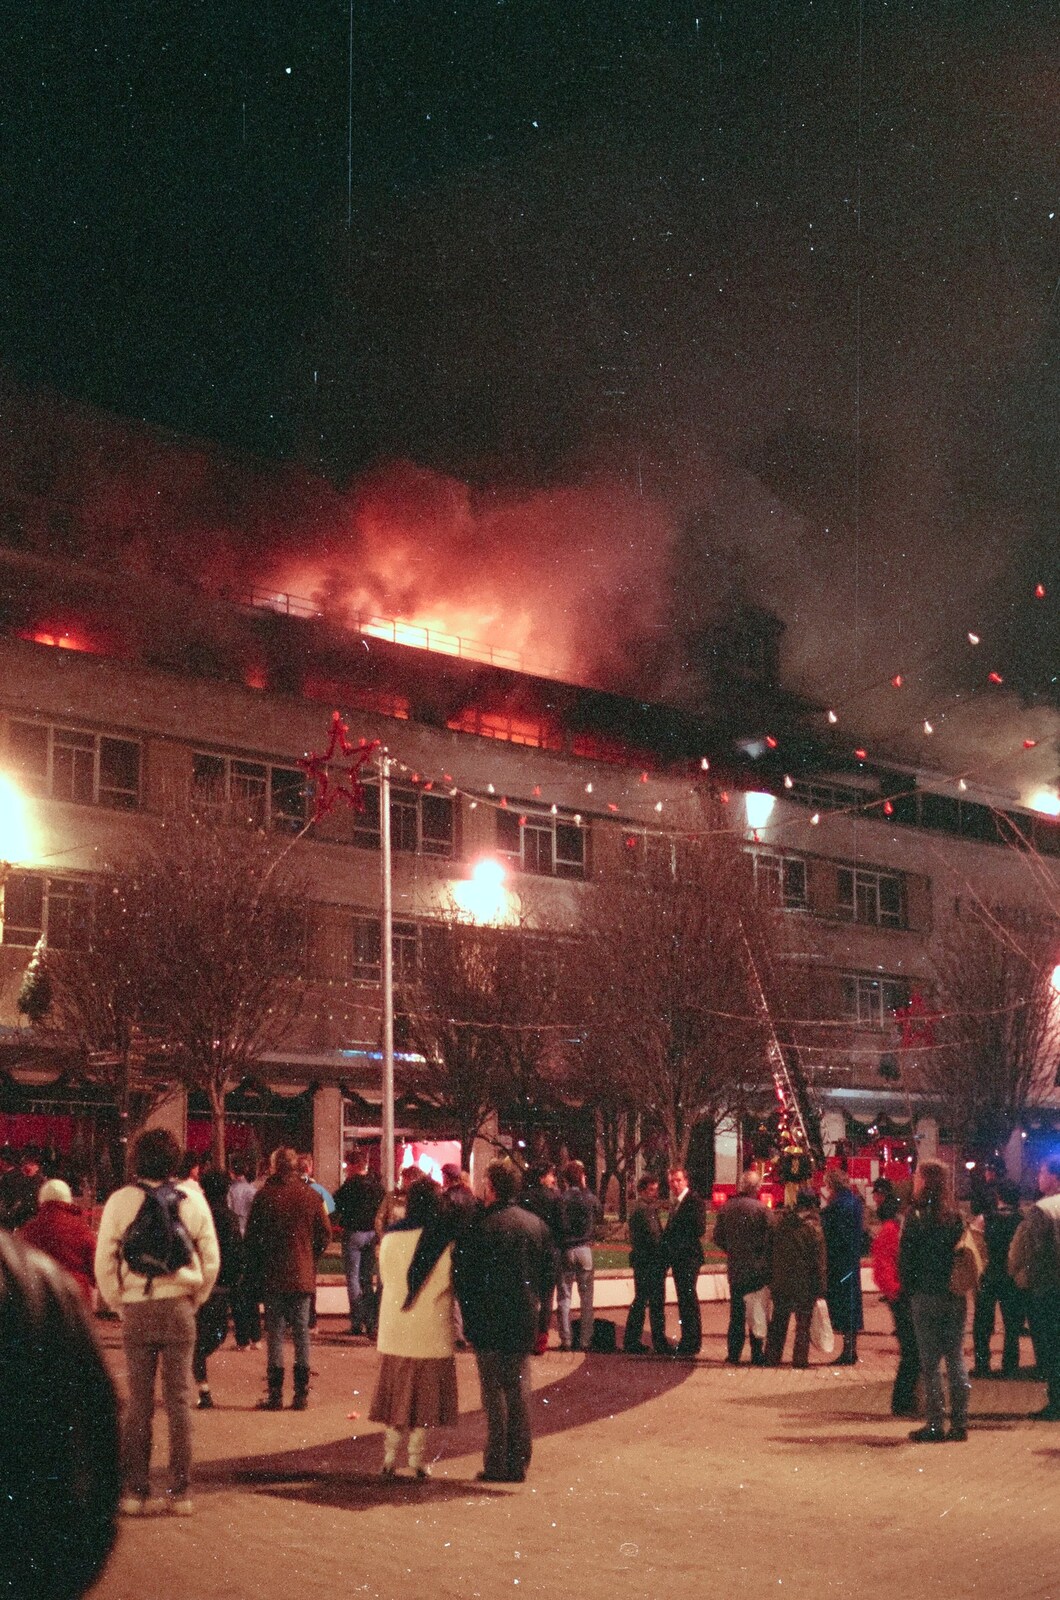 The fire on third floor is spreading from Uni: The Fire-Bombing of Dingles, Plymouth, Devon - 19th December 1988